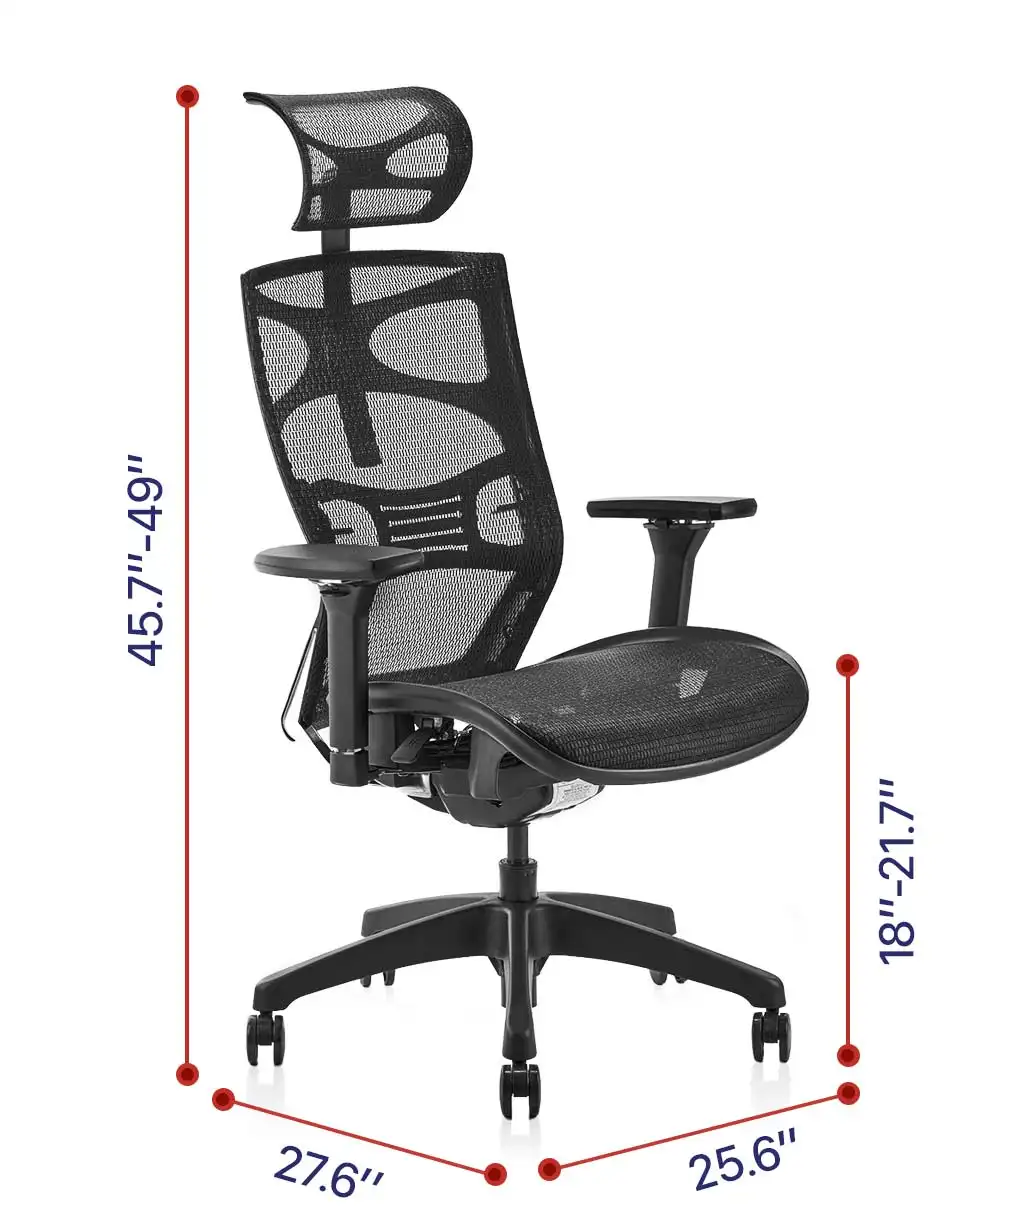 High end breathable mesh lumbar support Bright color antique style office task chairs platinum ergonomic mesh chair